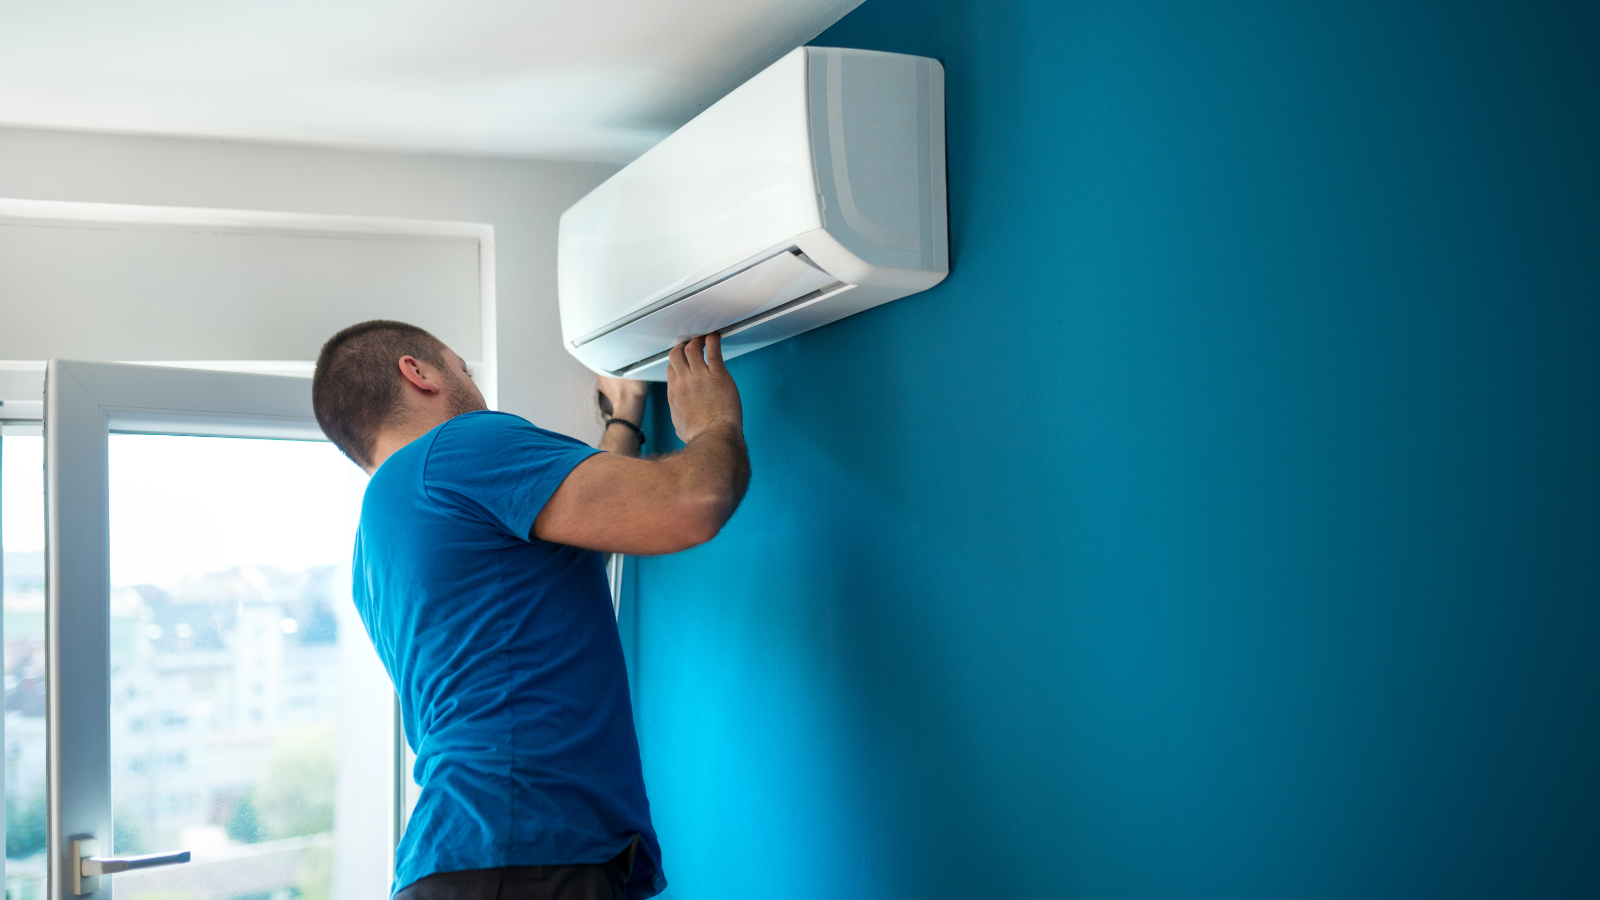 A man is installing an air conditioner on a blue wall.